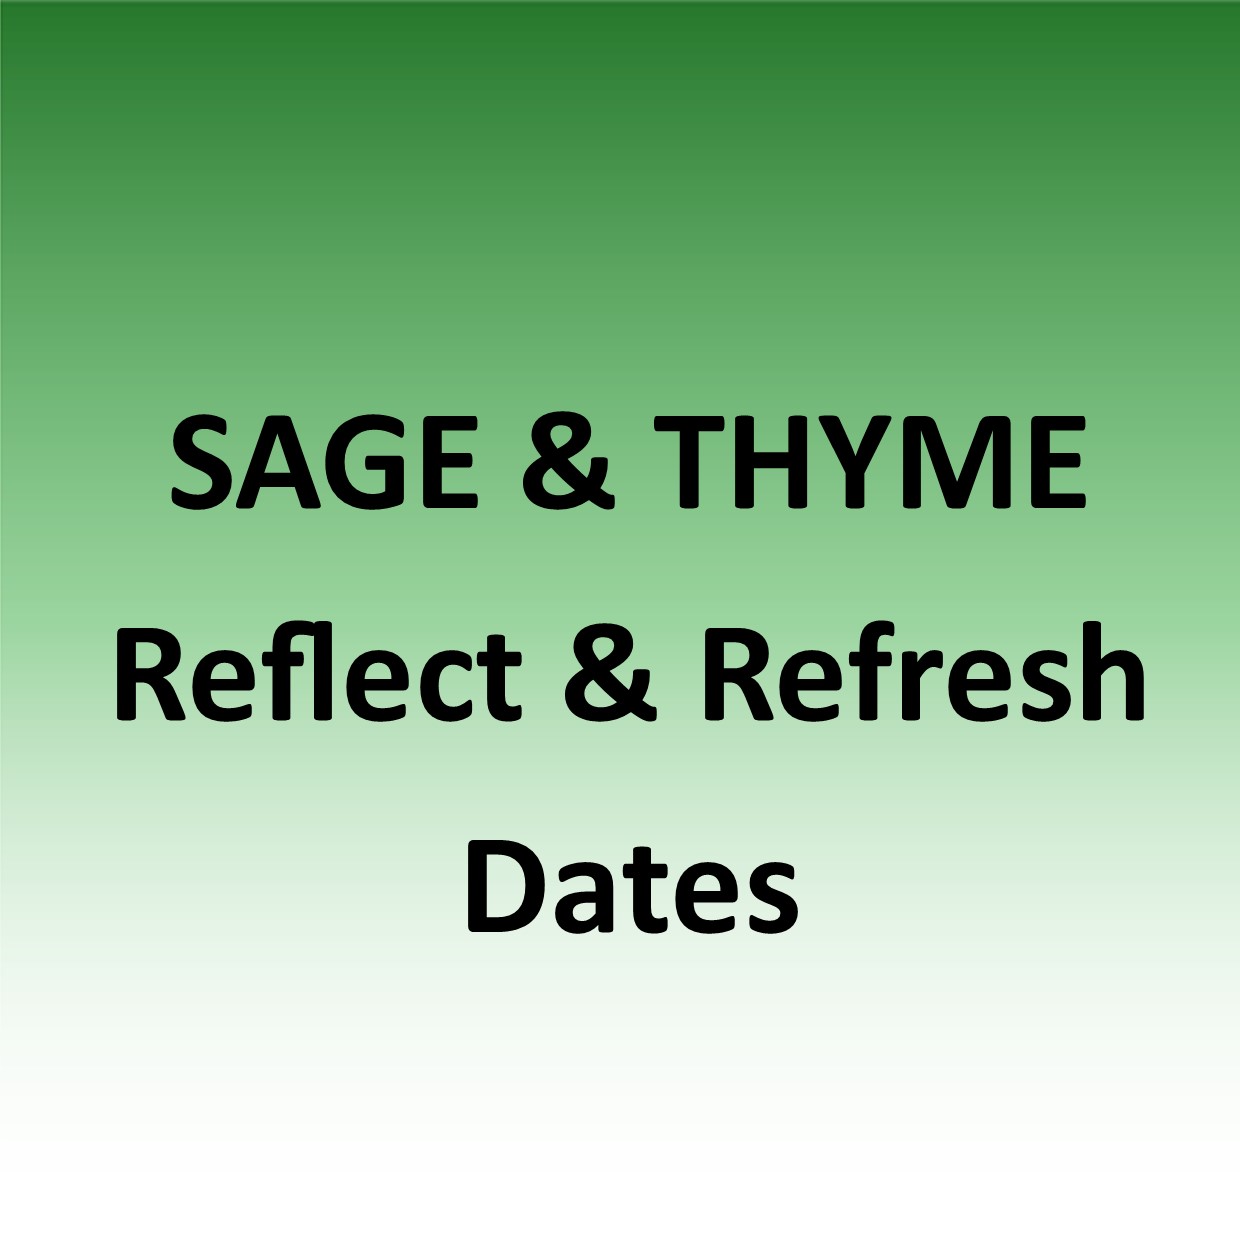 SAGE & THYME Reflect and Refresh dates